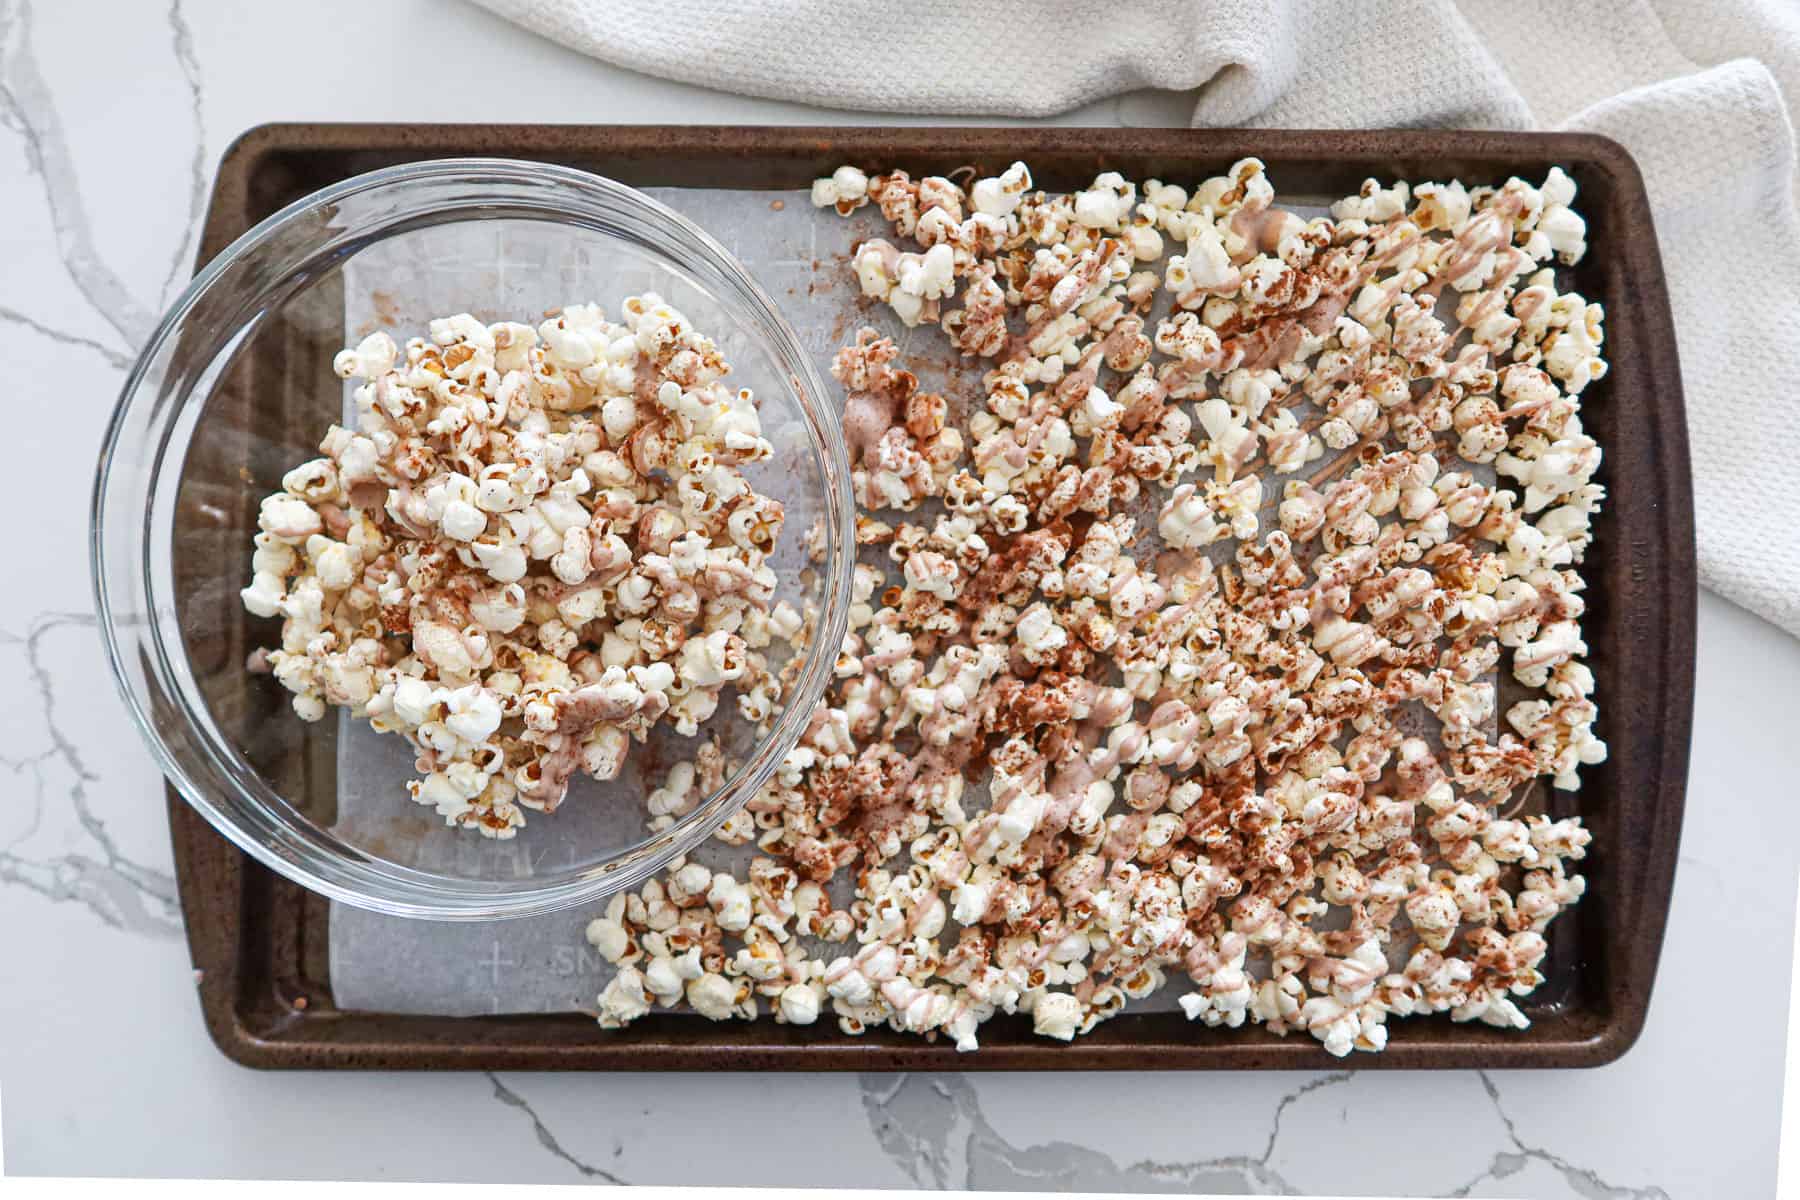 Breaking cinnamon popcorn into pieces and putting them in a bowl.